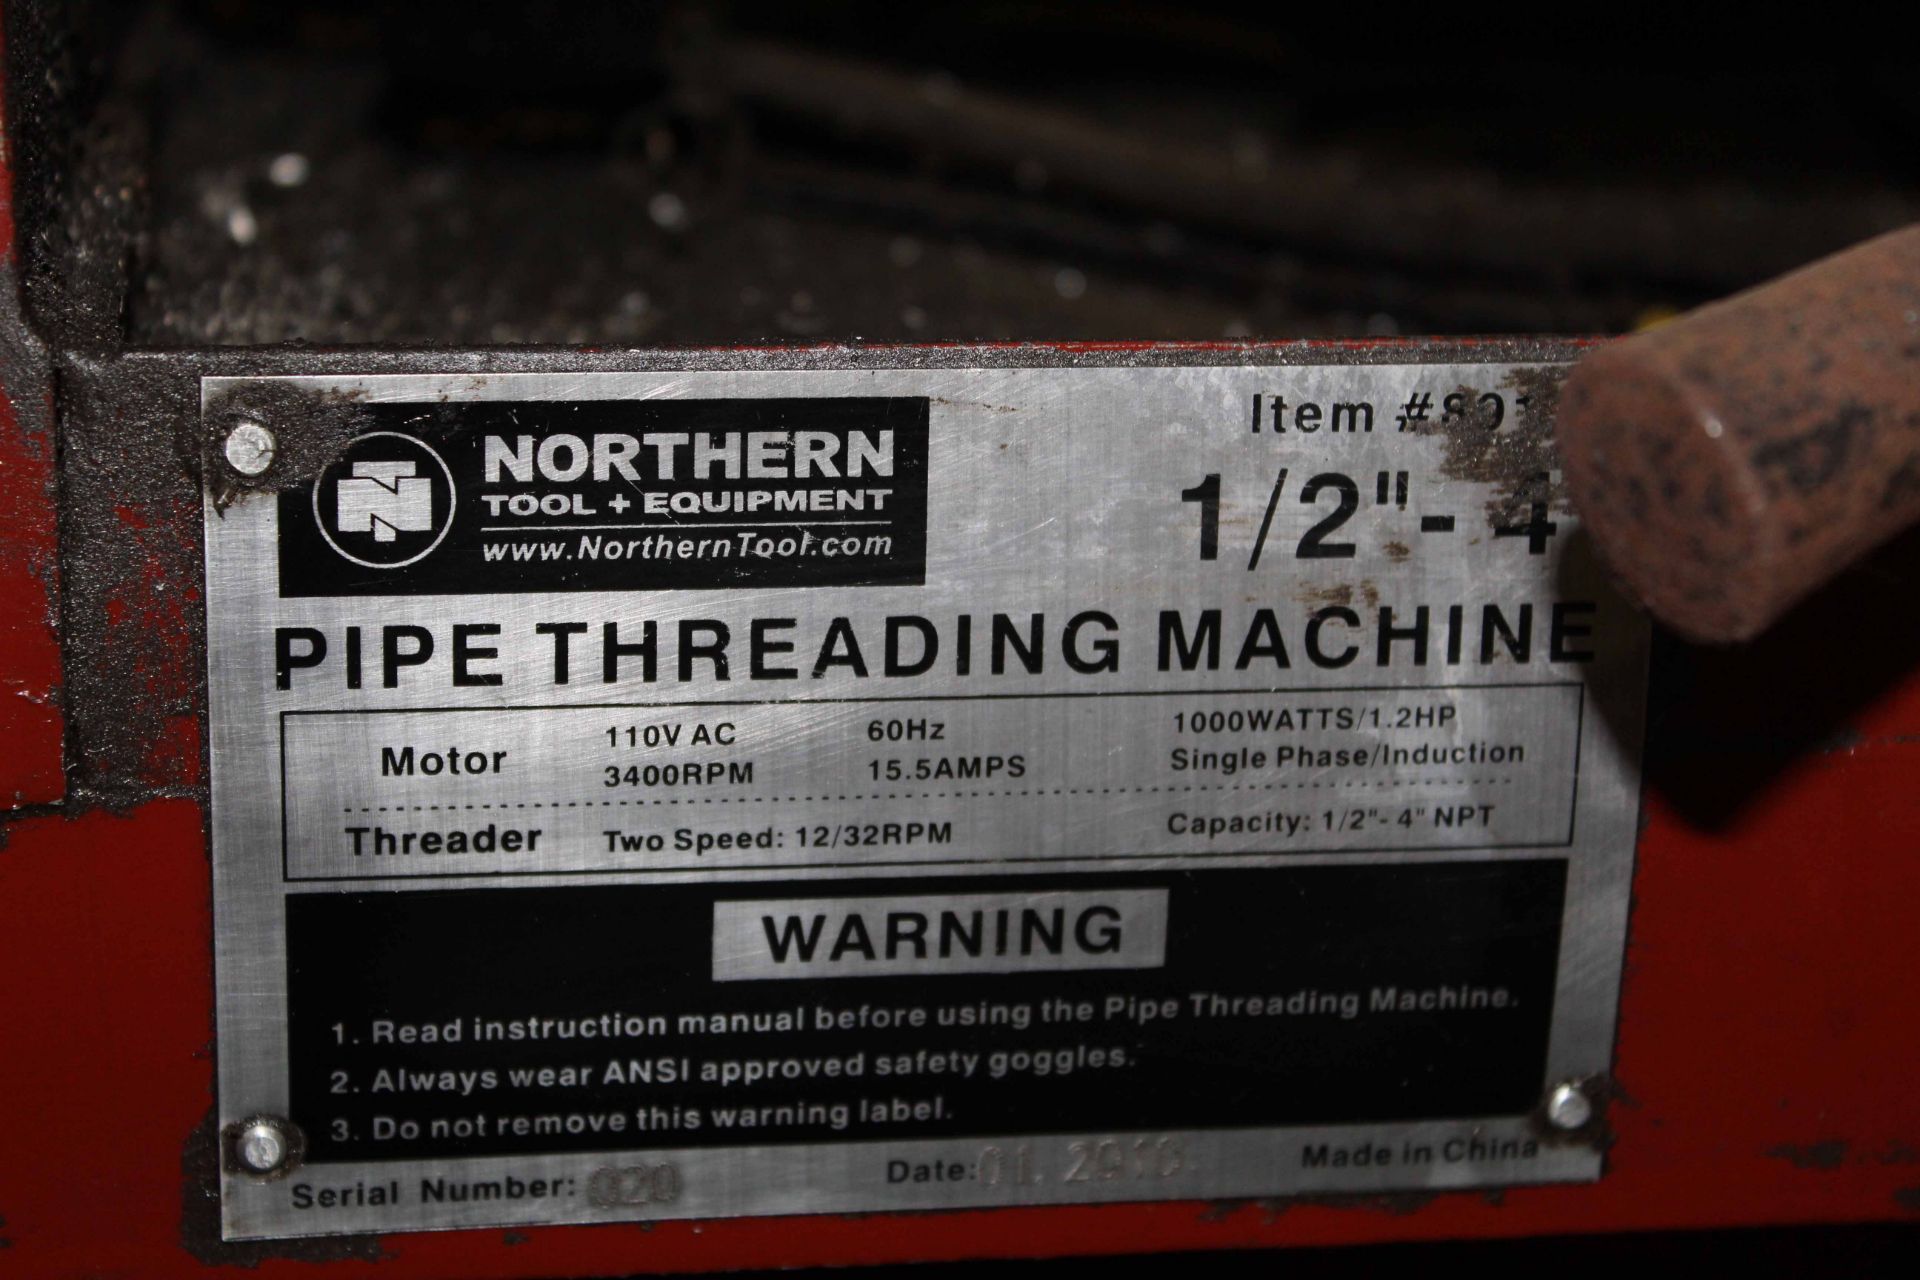 PIPE THREADING MACHINE, NORTHERN, new 2010, 1-1/2" to 4", S/N 020 - Image 3 of 4